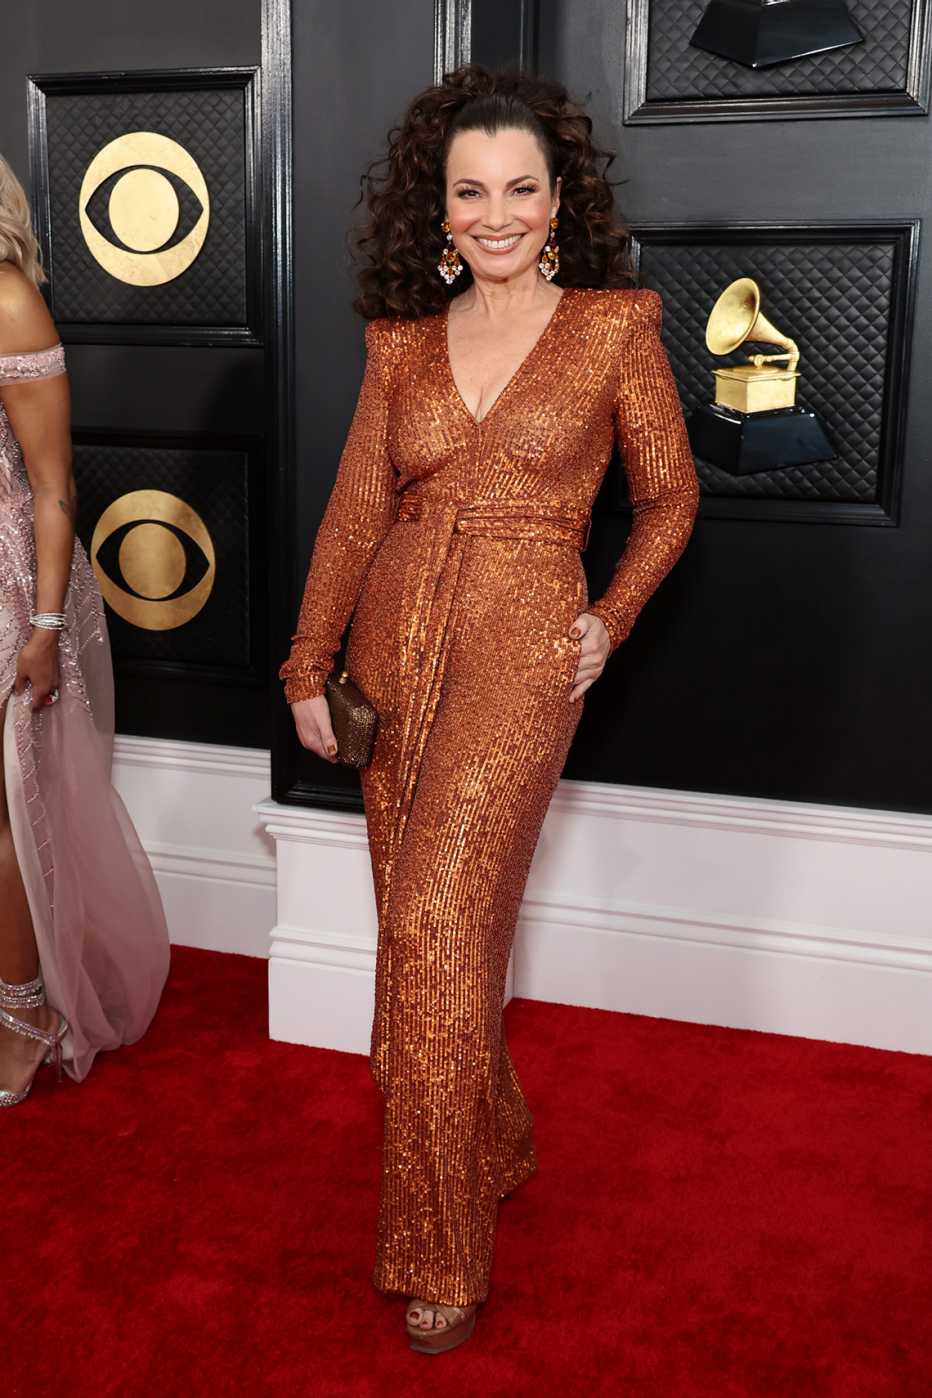 Fran Drescher on the red carpet at the 65th Grammy Awards